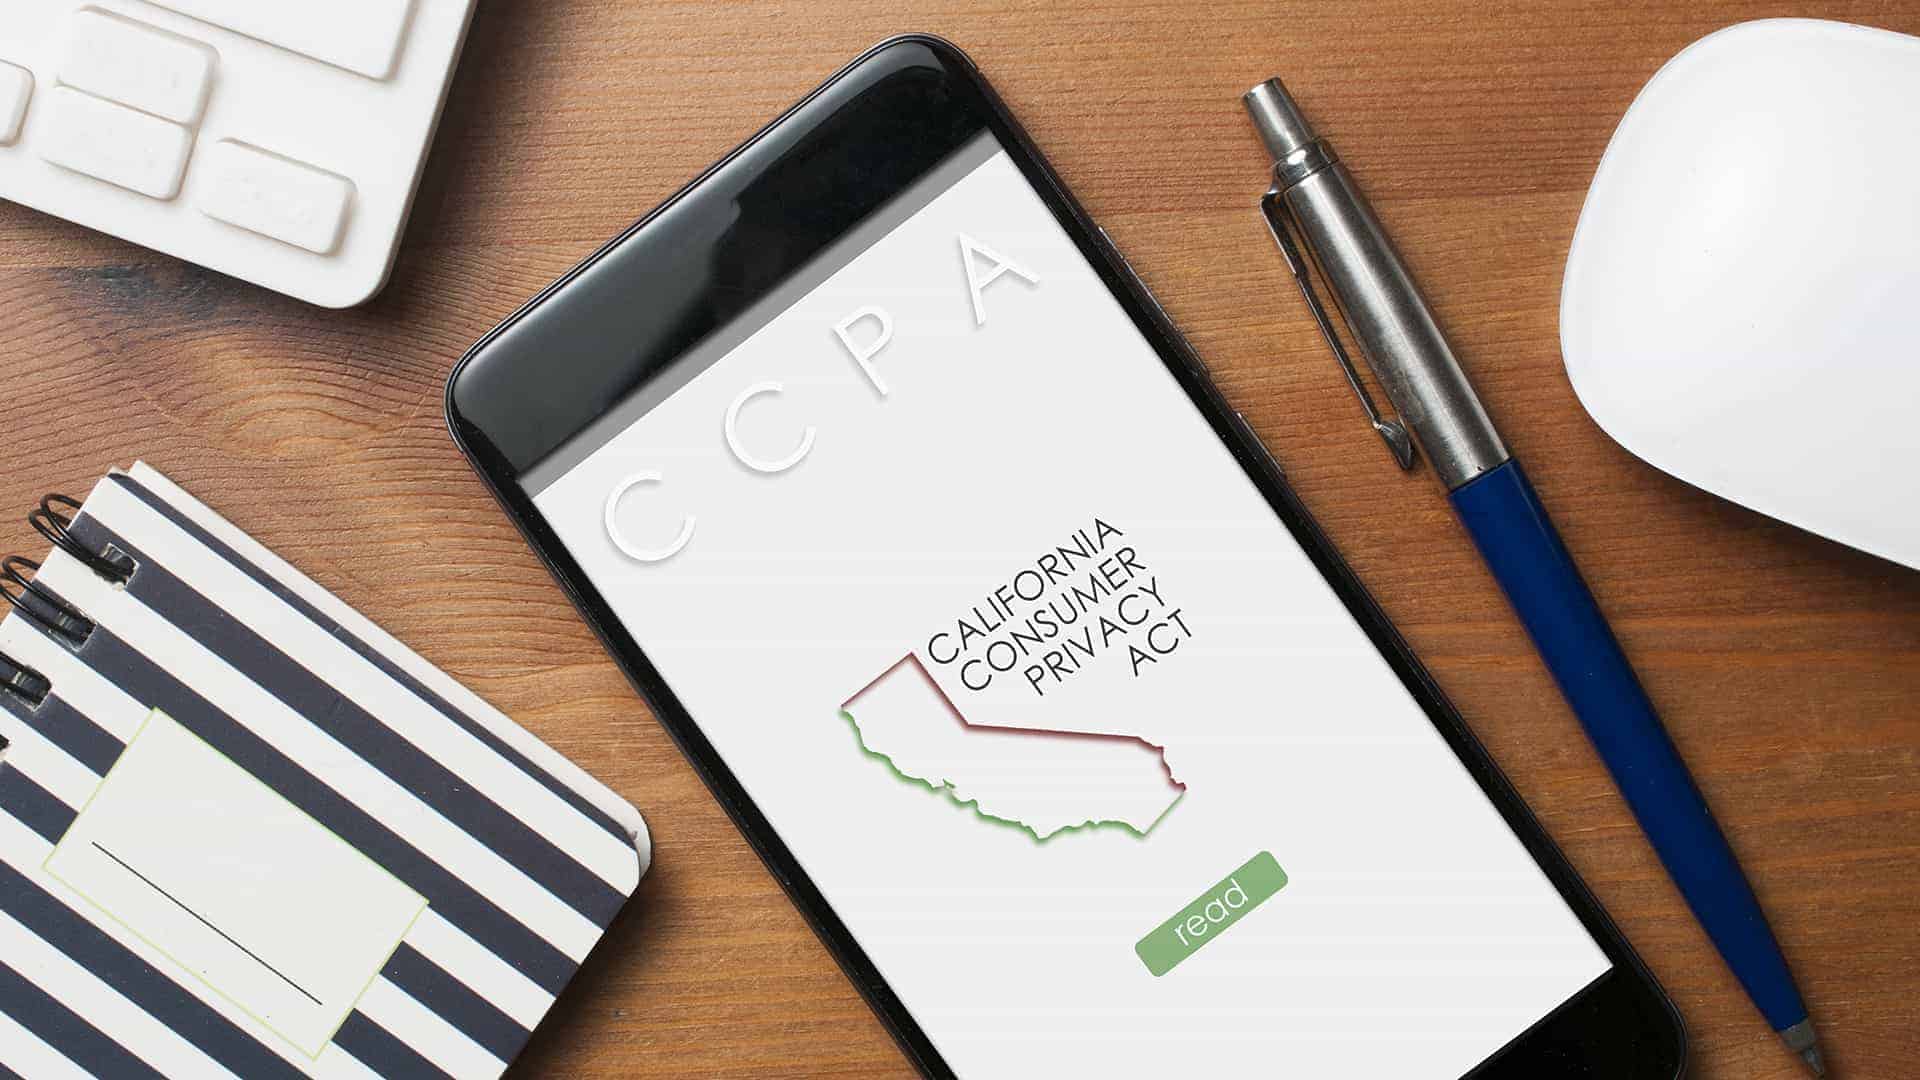 image of CCPA on smartphone